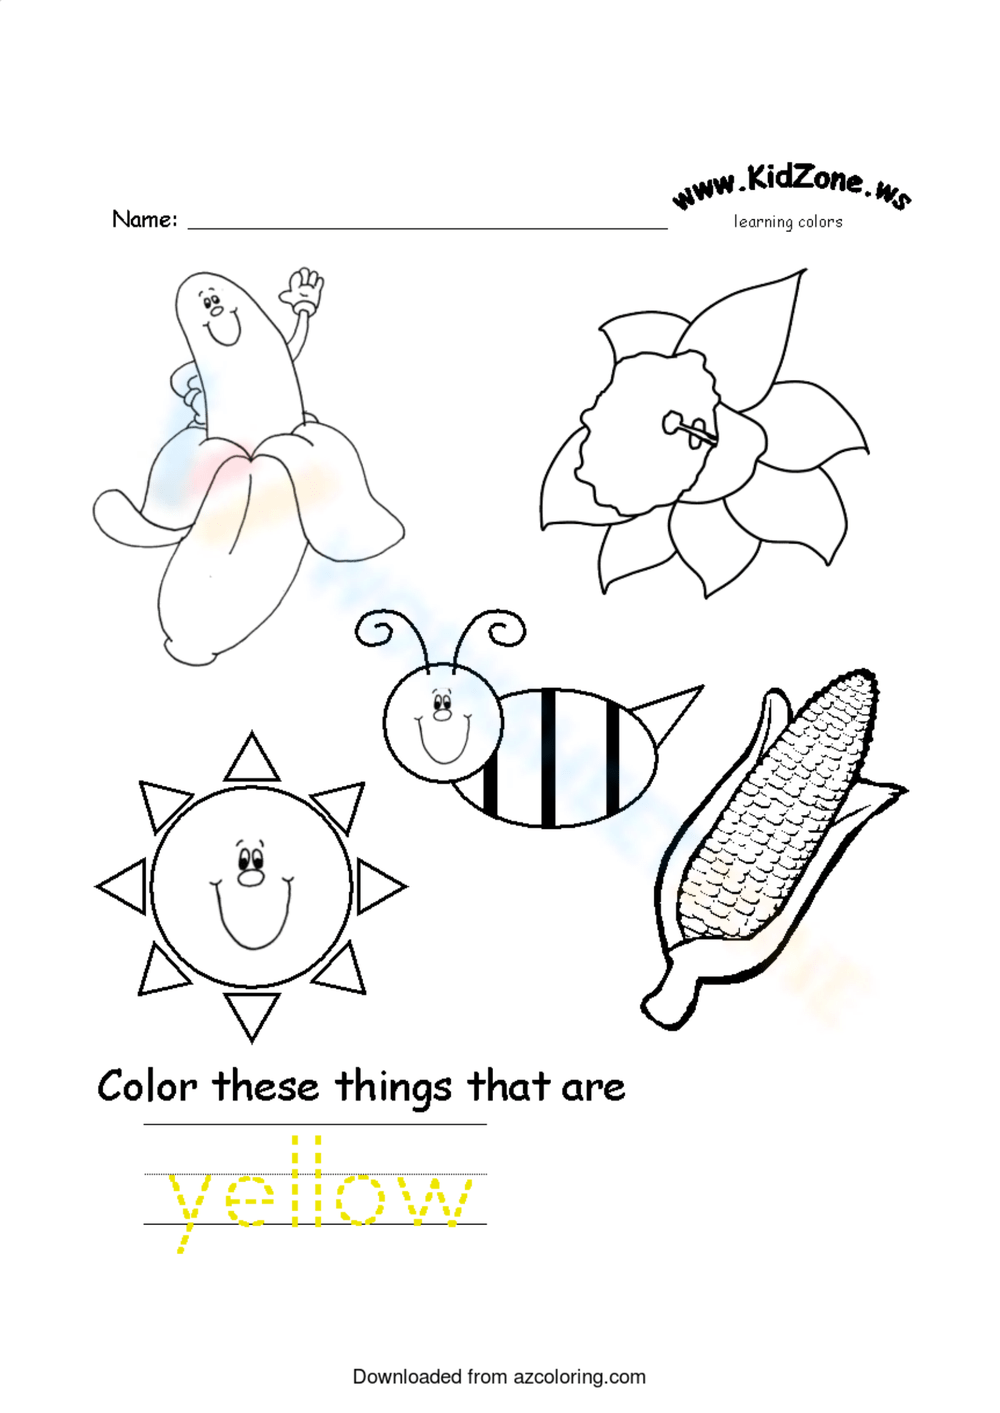 Free printable color yellow worksheets for kids